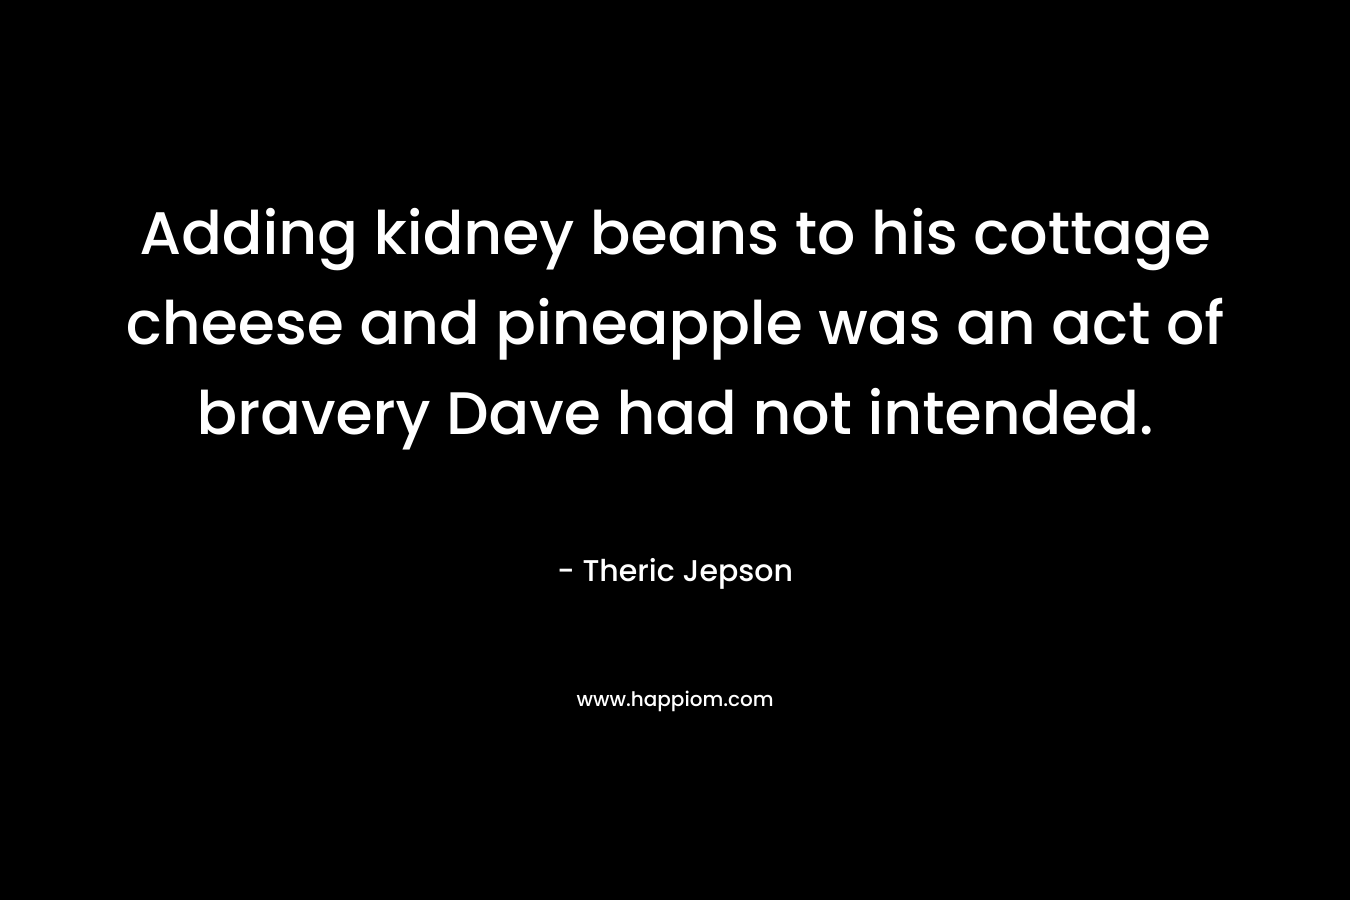 Adding kidney beans to his cottage cheese and pineapple was an act of bravery Dave had not intended.